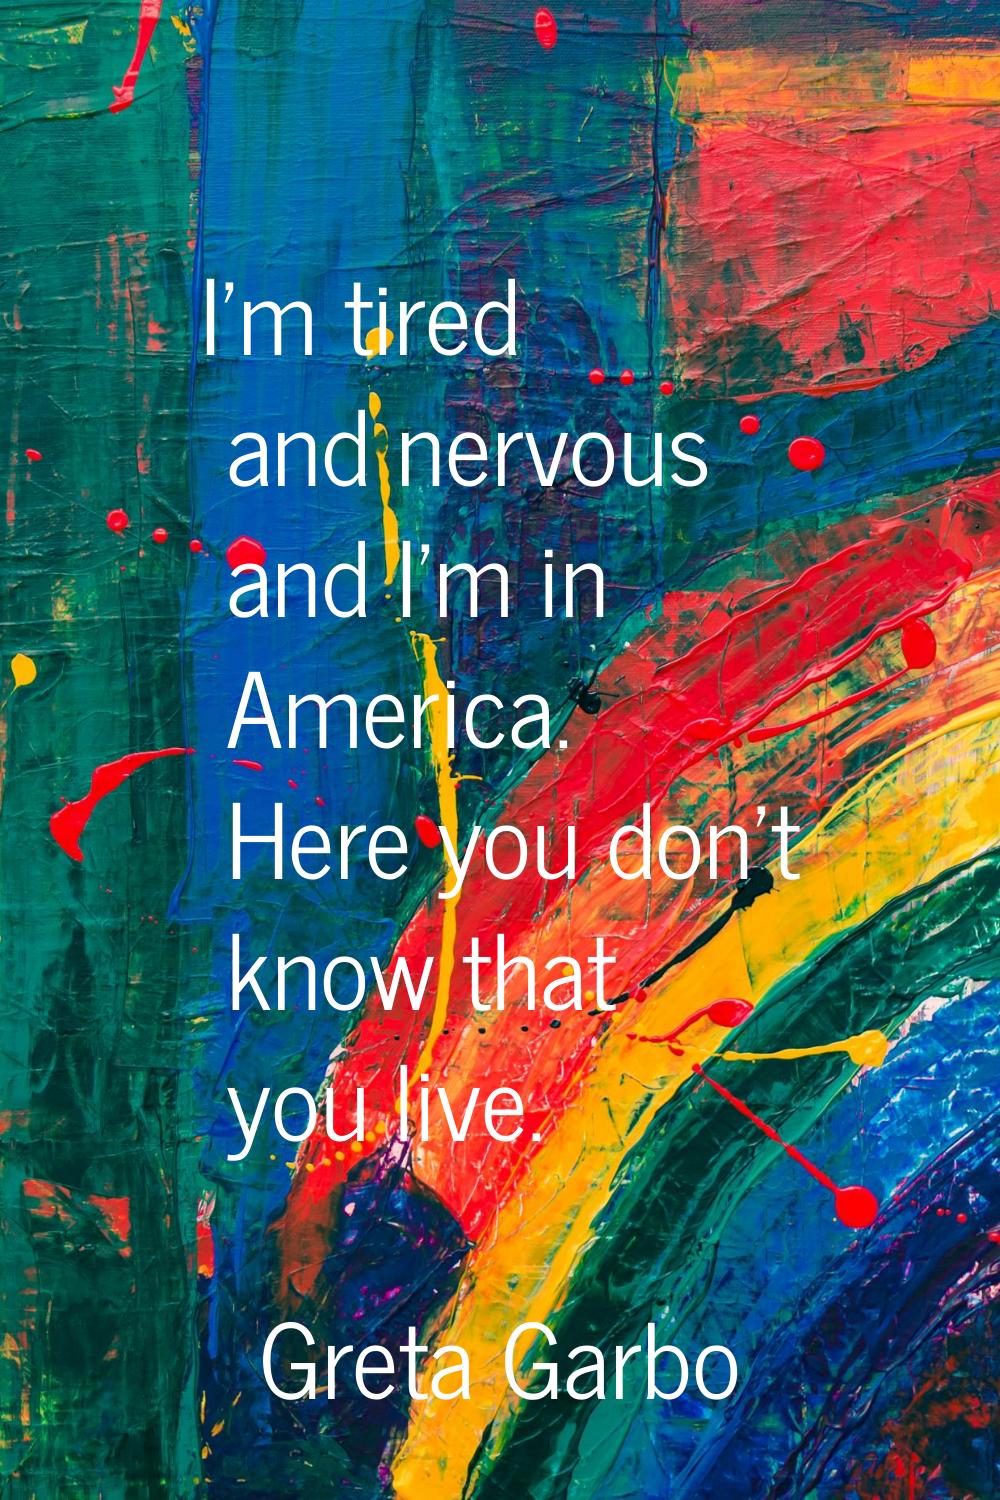 I'm tired and nervous and I'm in America. Here you don't know that you live.